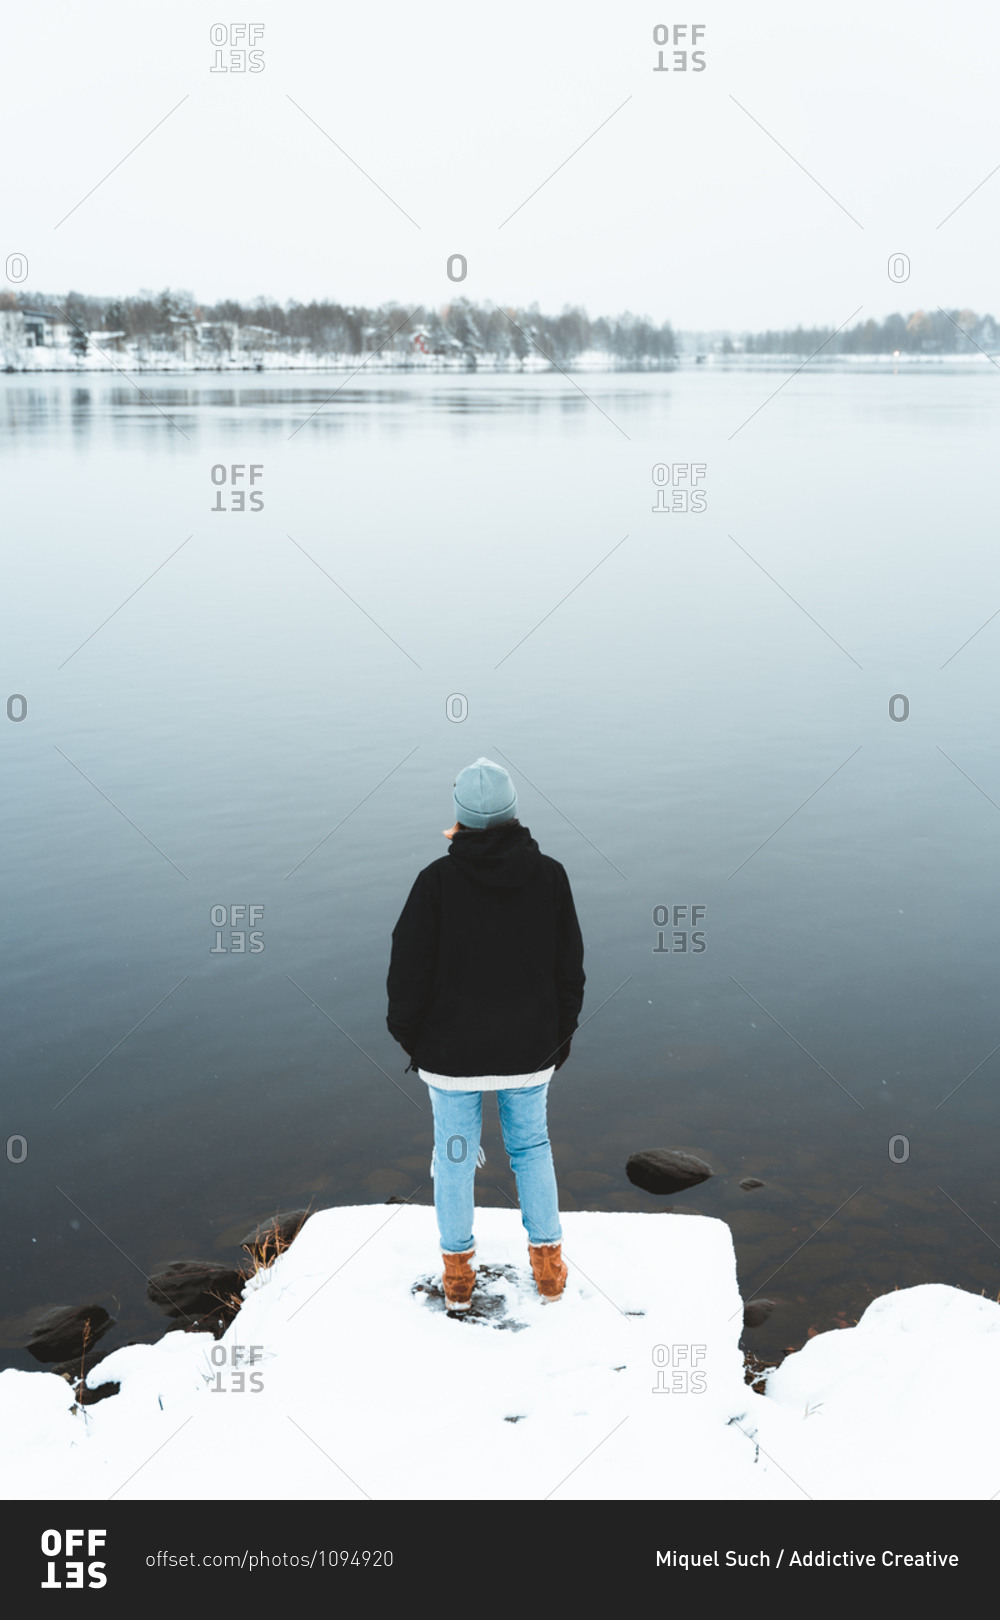 Back view of female traveler standing on shore of pond and admiring scenery of small village in winter forest